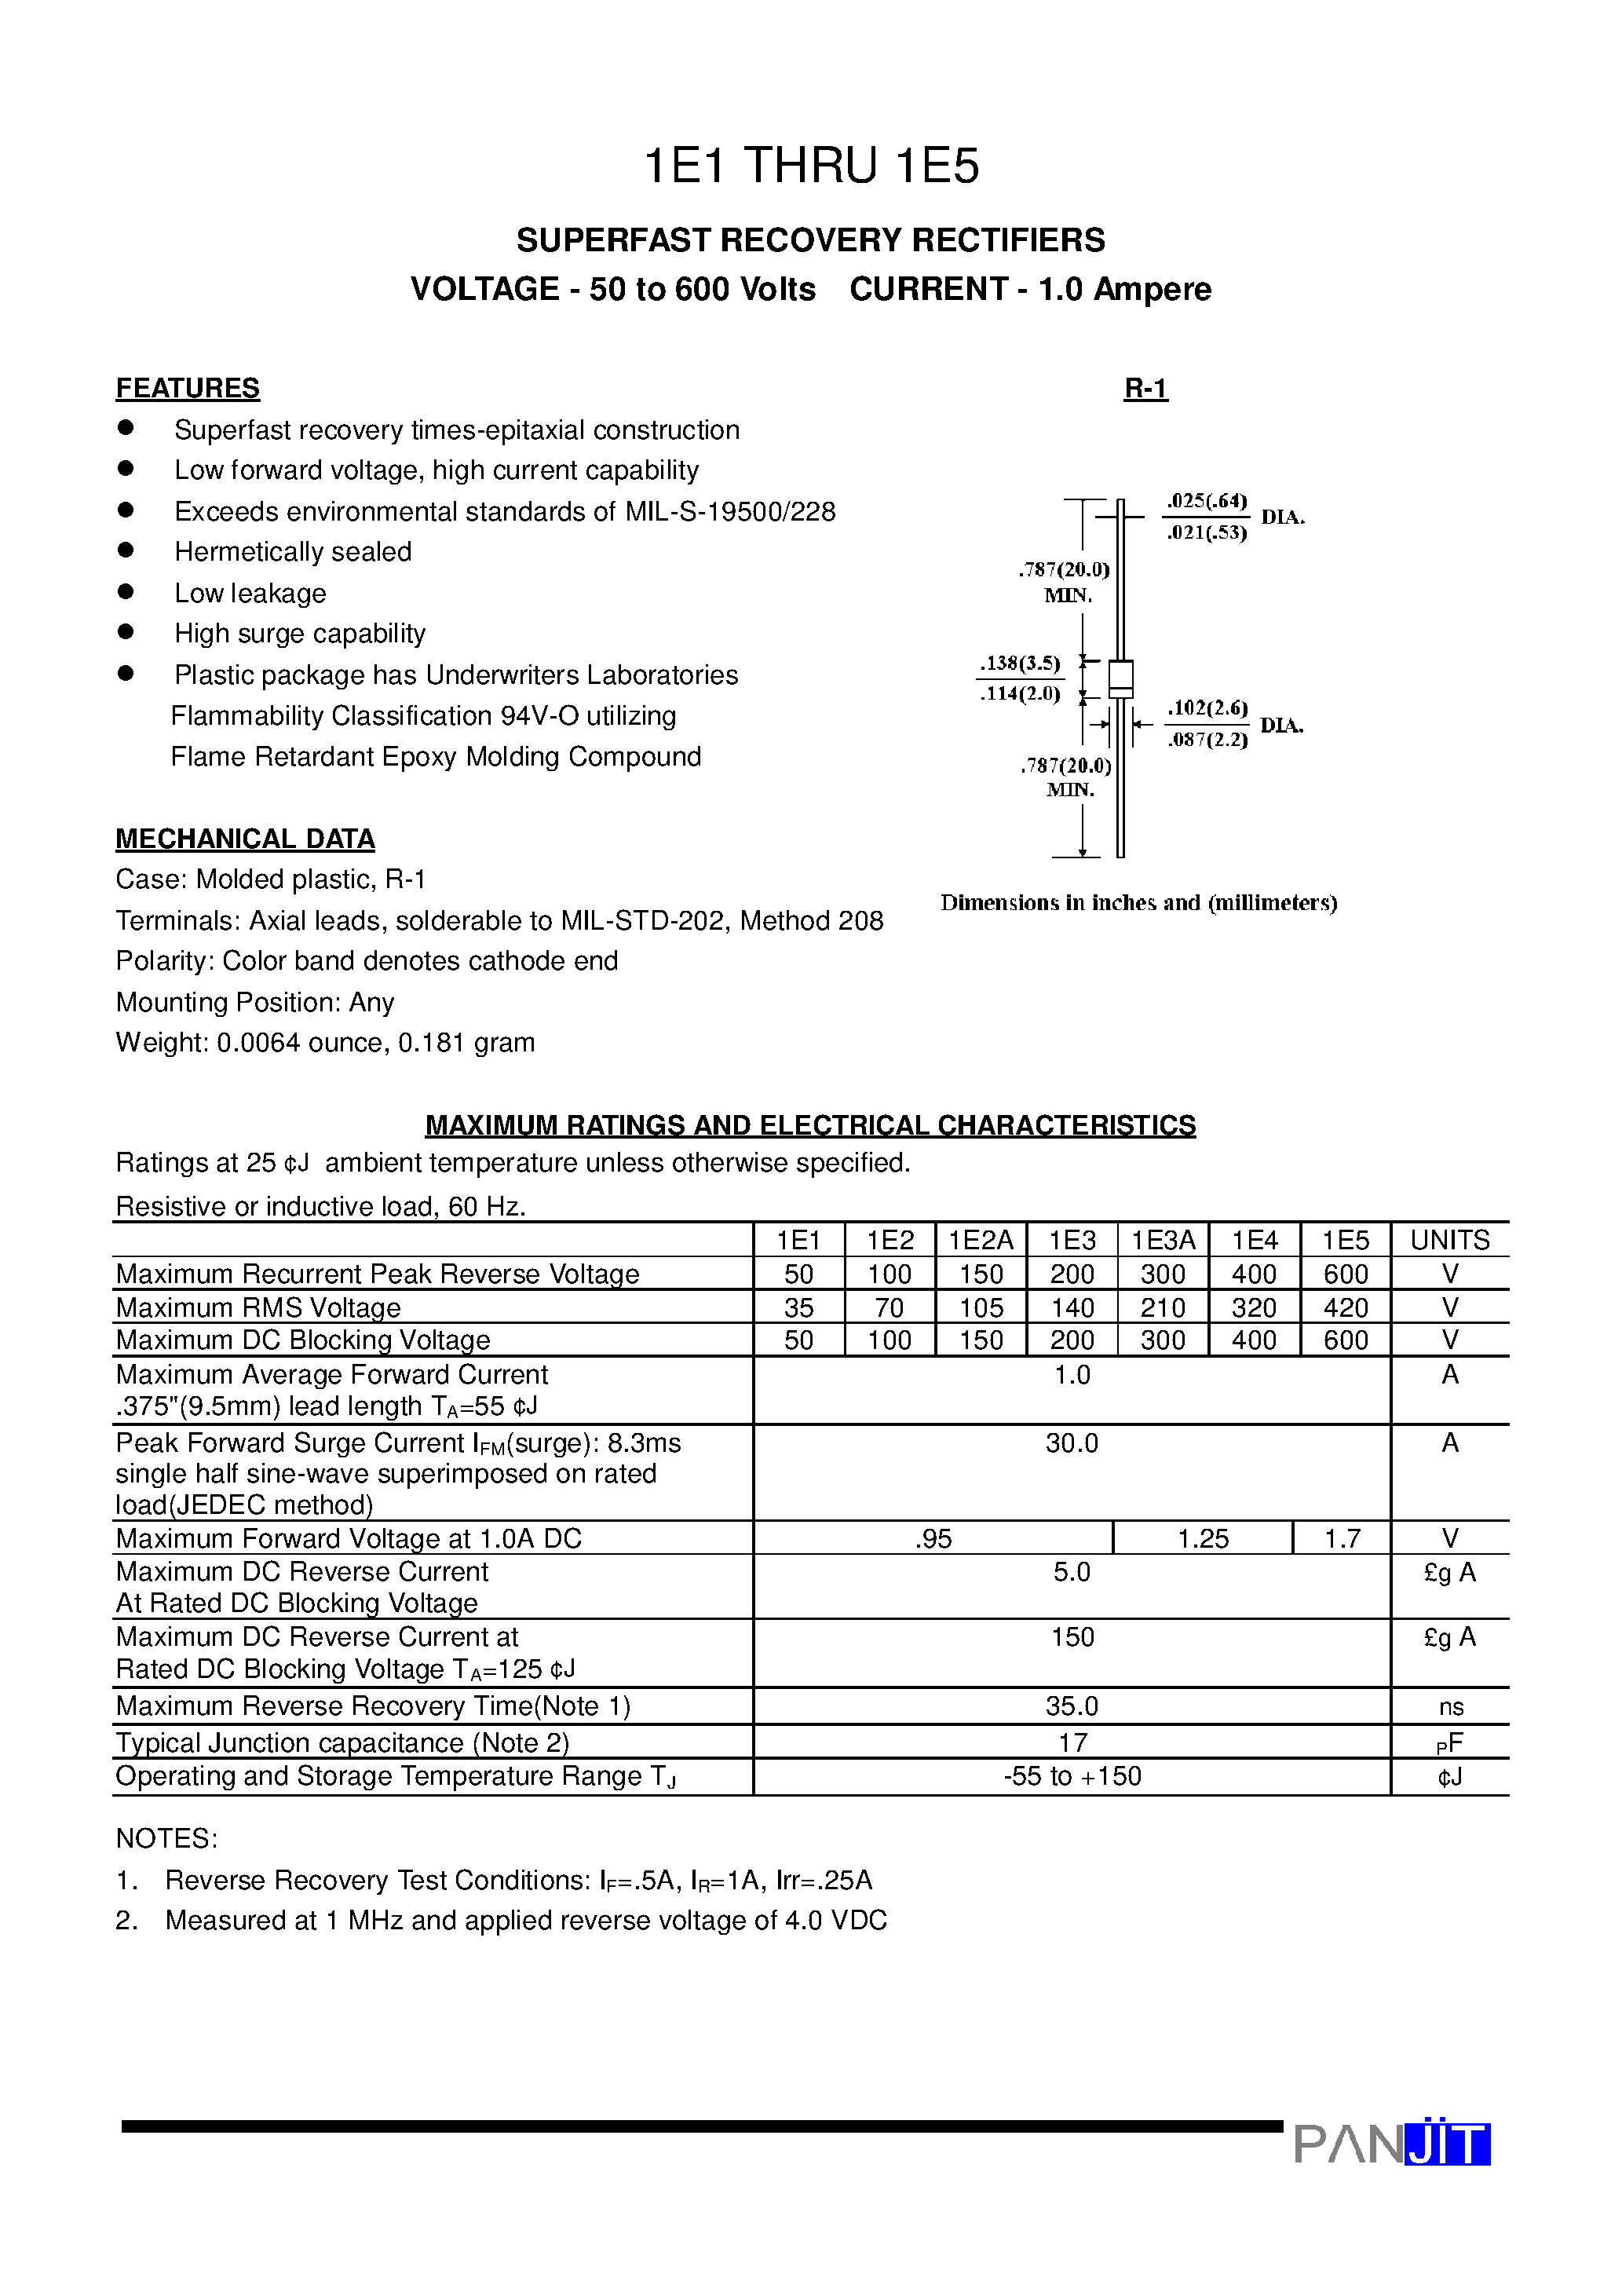 Datasheet 1.00E+02 - SUPERFAST RECOVERY RECTIFIERS(VOLTAGE - 50 to 600 Volts CURRENT - 1.0 Ampere) page 1